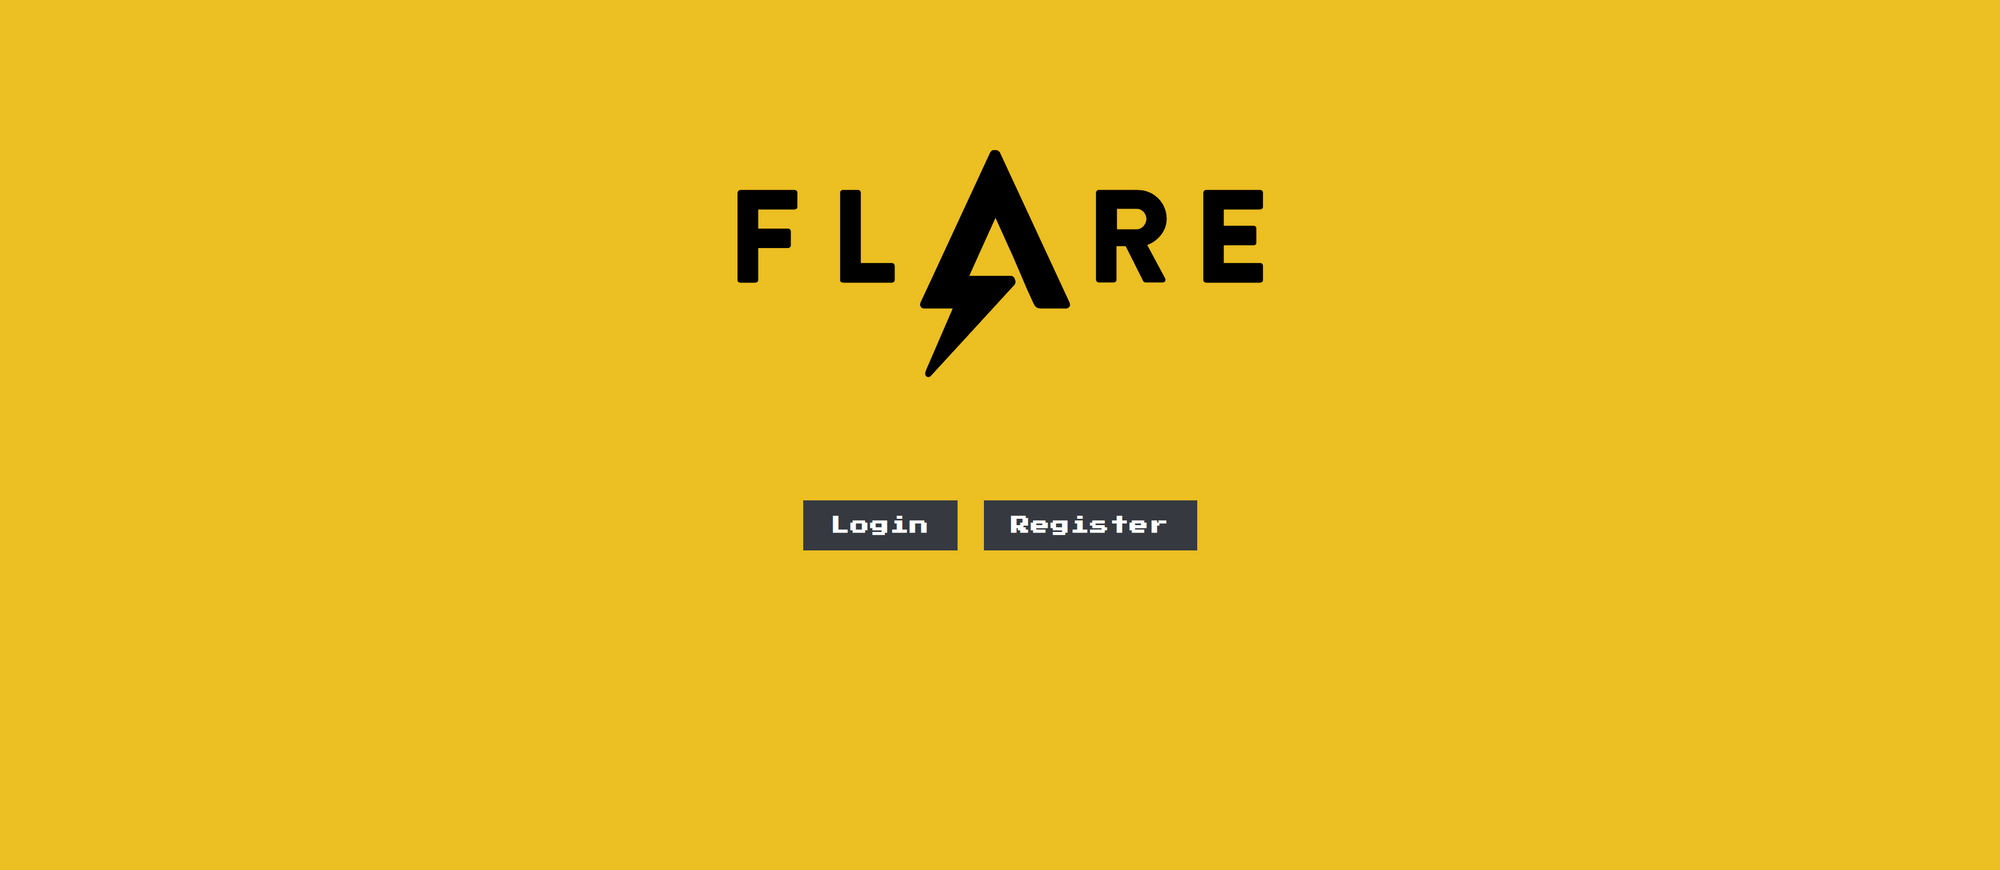 Flare-On 2019 solutions/notes (upd. 11.02)